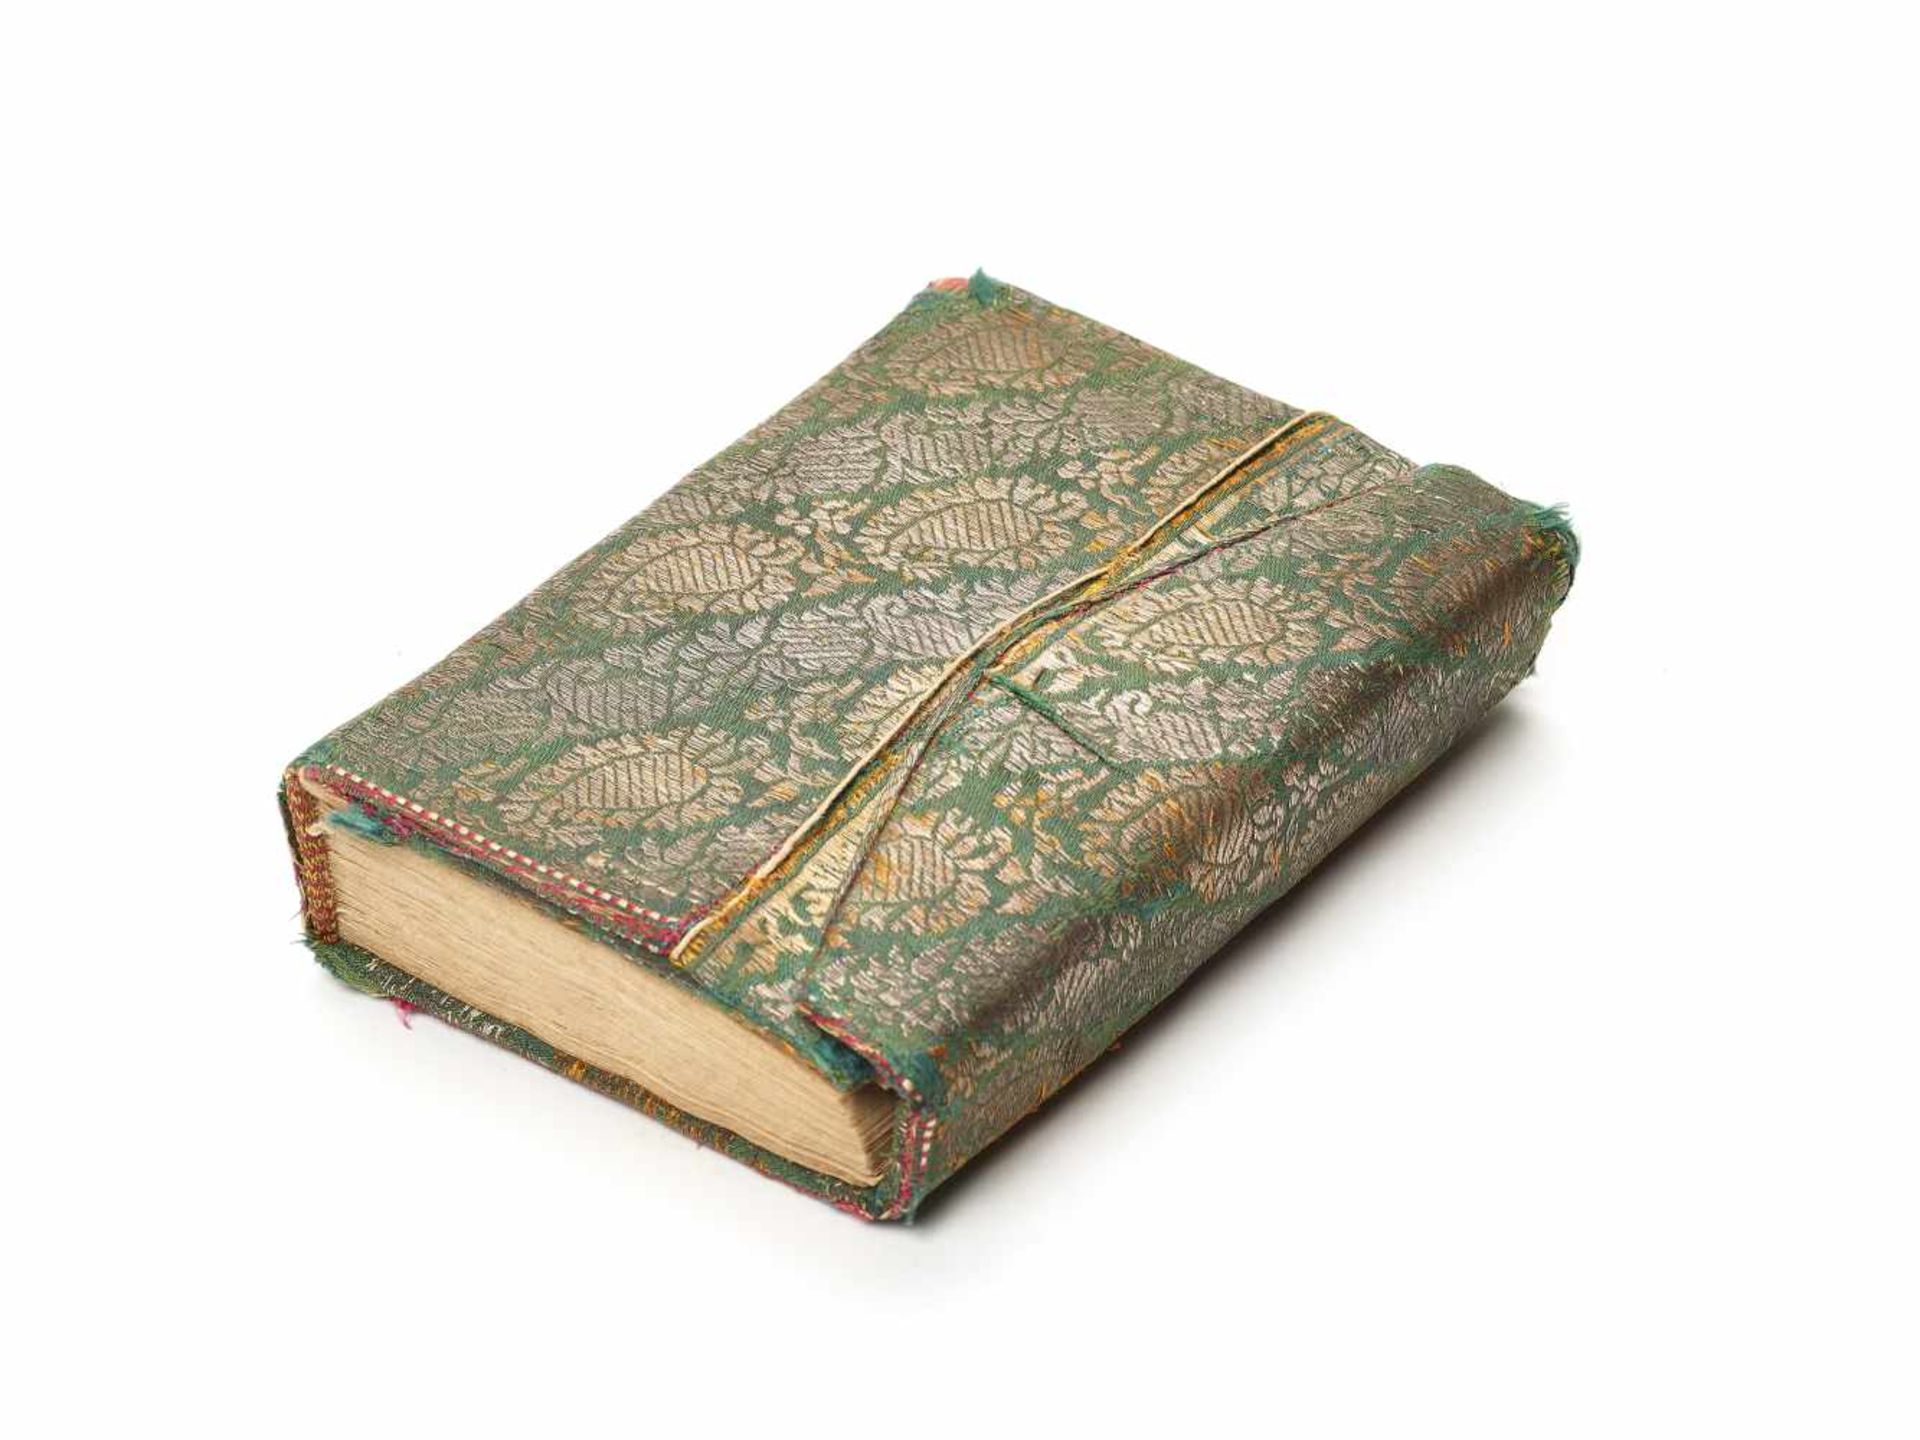 AN INDIAN MANUSCRIPT - 19th CENTURYFabric cover with inside paper pages, hand painted with colors - Image 3 of 4